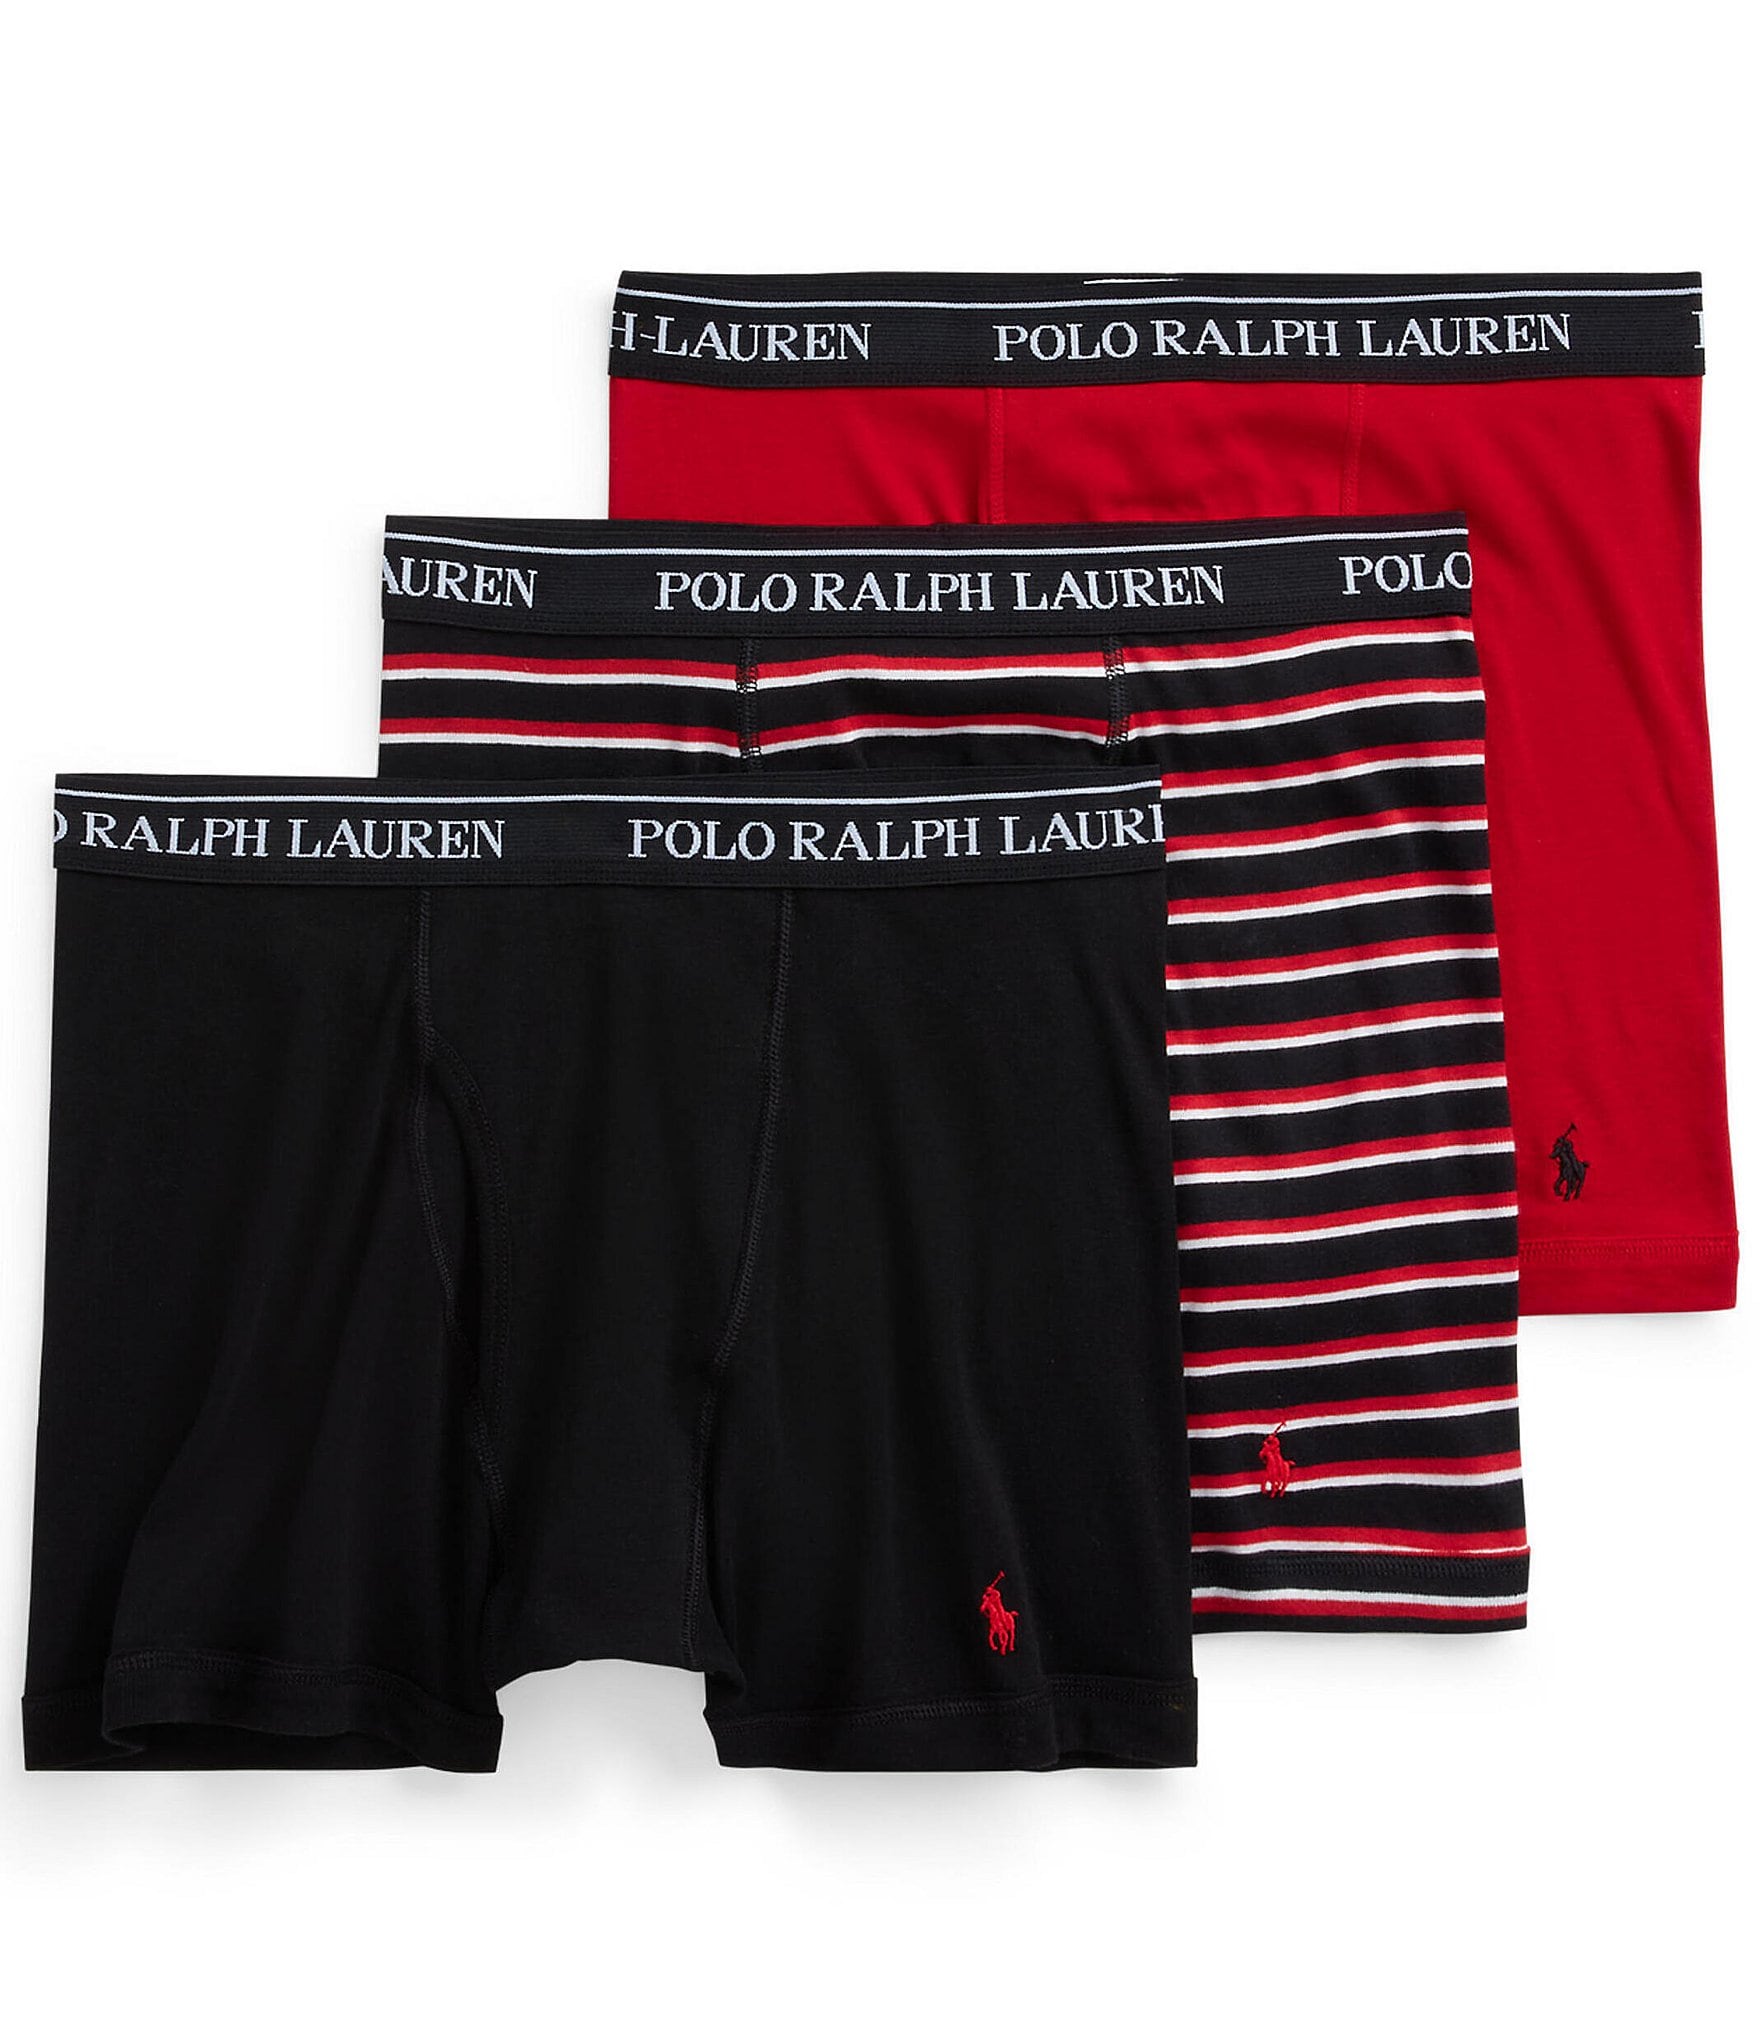 https://dimg.dillards.com/is/image/DillardsZoom/zoom/polo-ralph-lauren-classic-fit-solid-and-stripe-6-inseam-boxer-briefs-3-pack/00000003_zi_22f8bf5e-abec-4a23-9f0e-d9fe2c3630f6.jpg